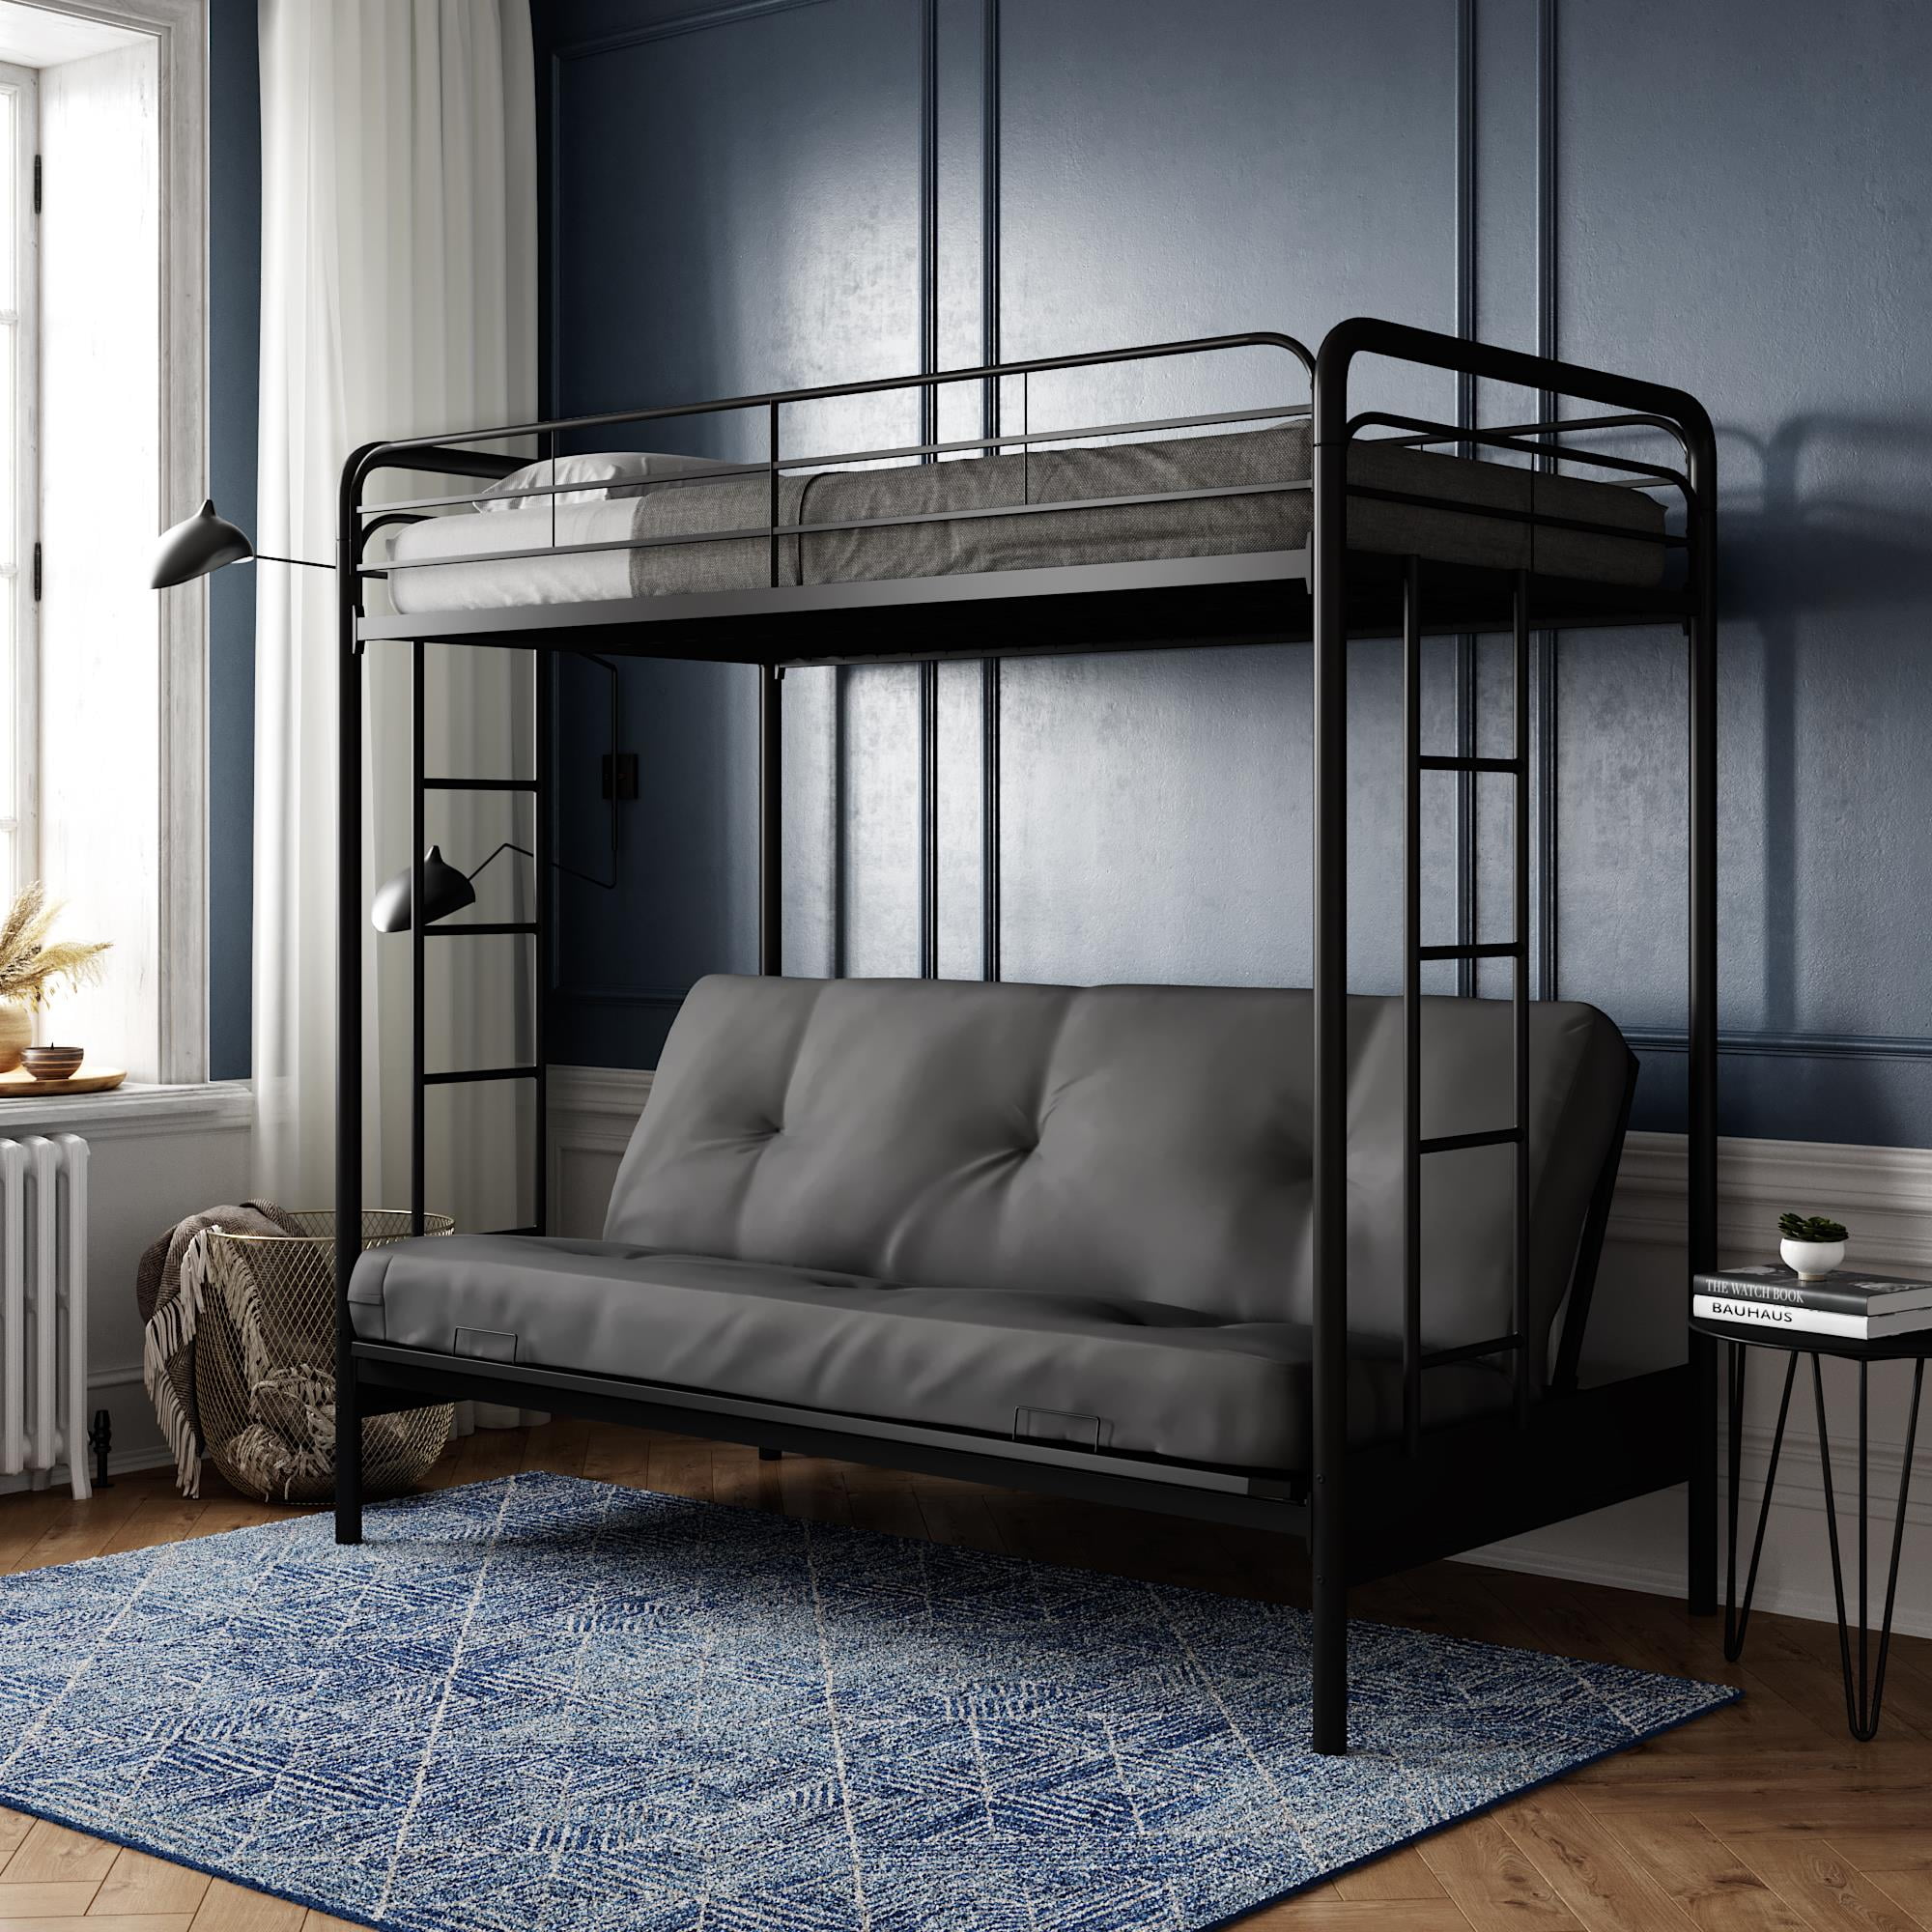 Dhp Twin Over Futon Black Metal Bunk Bed, Couch That Converts To Bunk Bed